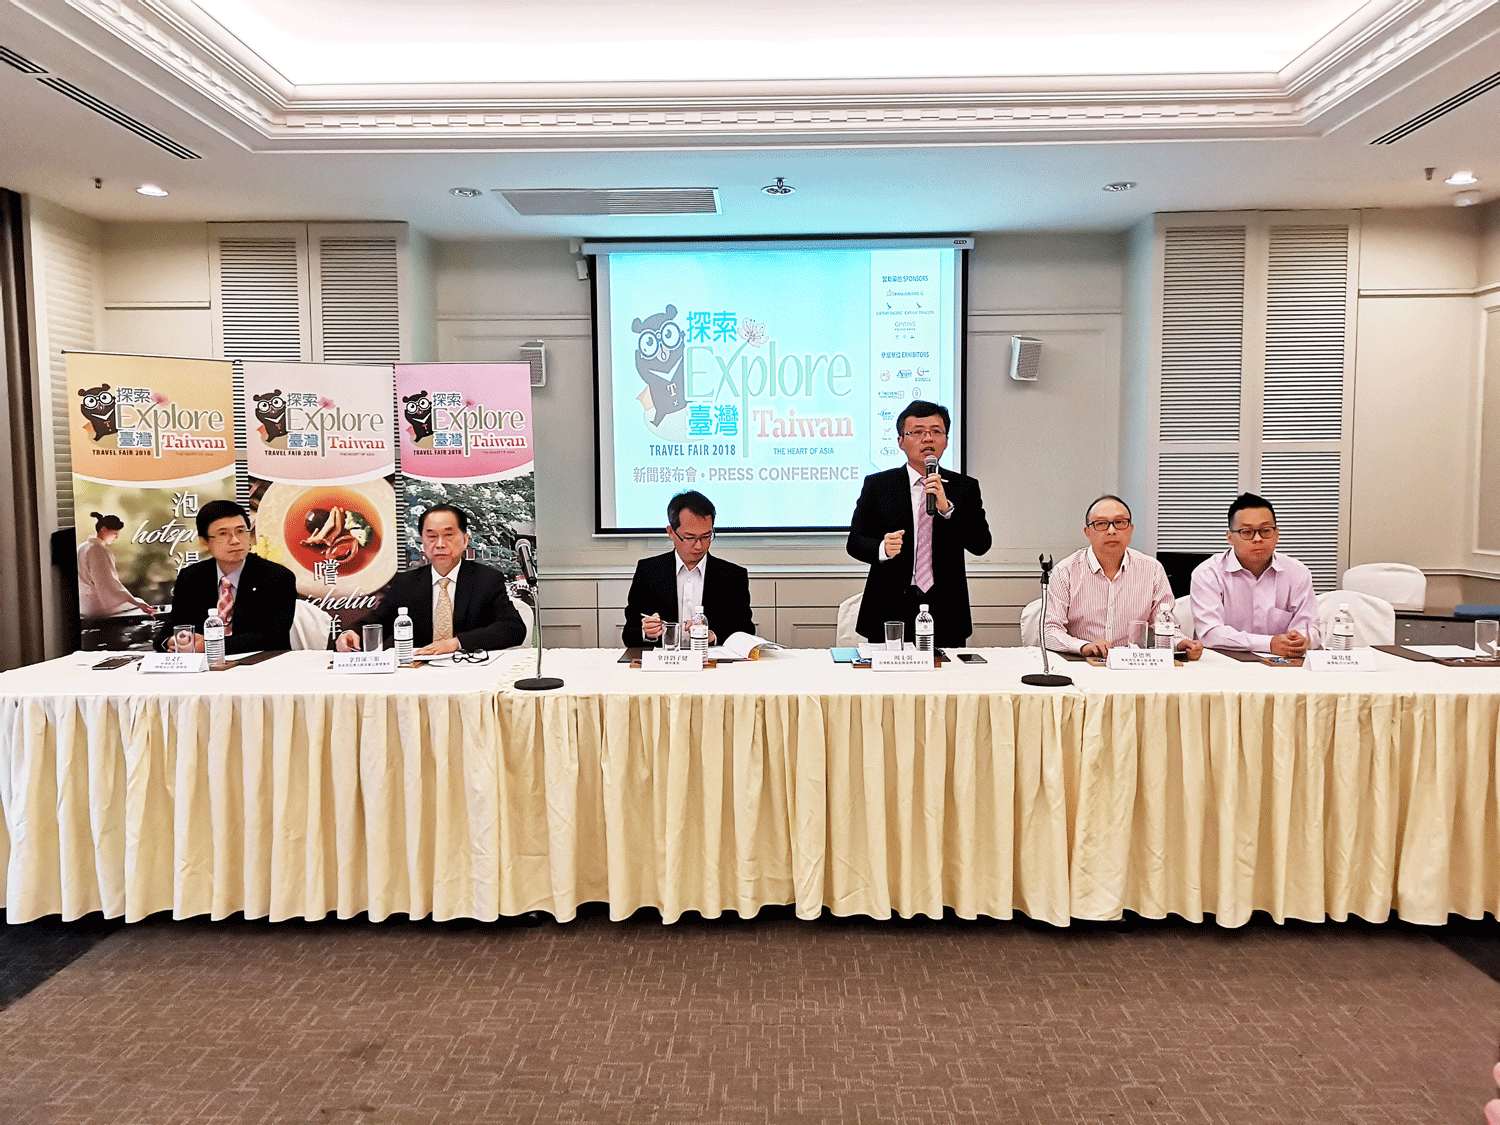 Taiwan Tourism Bureau Kuala Lumpur office Director Mr. Abe Chou Shih Pi (Standing) giving welcoming speech, from the left are Mr. William Wu, China Airlines Penang Branch general Manager; Dato Albert Tan Sam Soon, Malaysian Chinese Tourism Association (MCTA) National President; Y.B. Datuk Law Choo Kian, Speaker of Penang State Legislative; Mr. Andy Chuah Teik Hin, Malaysian Chinese Tourism Association (MCTA) Penang Chapter Chairman and Mr. Mr. Eu-Jeen Tan, Cathay Pacific district sales manager.